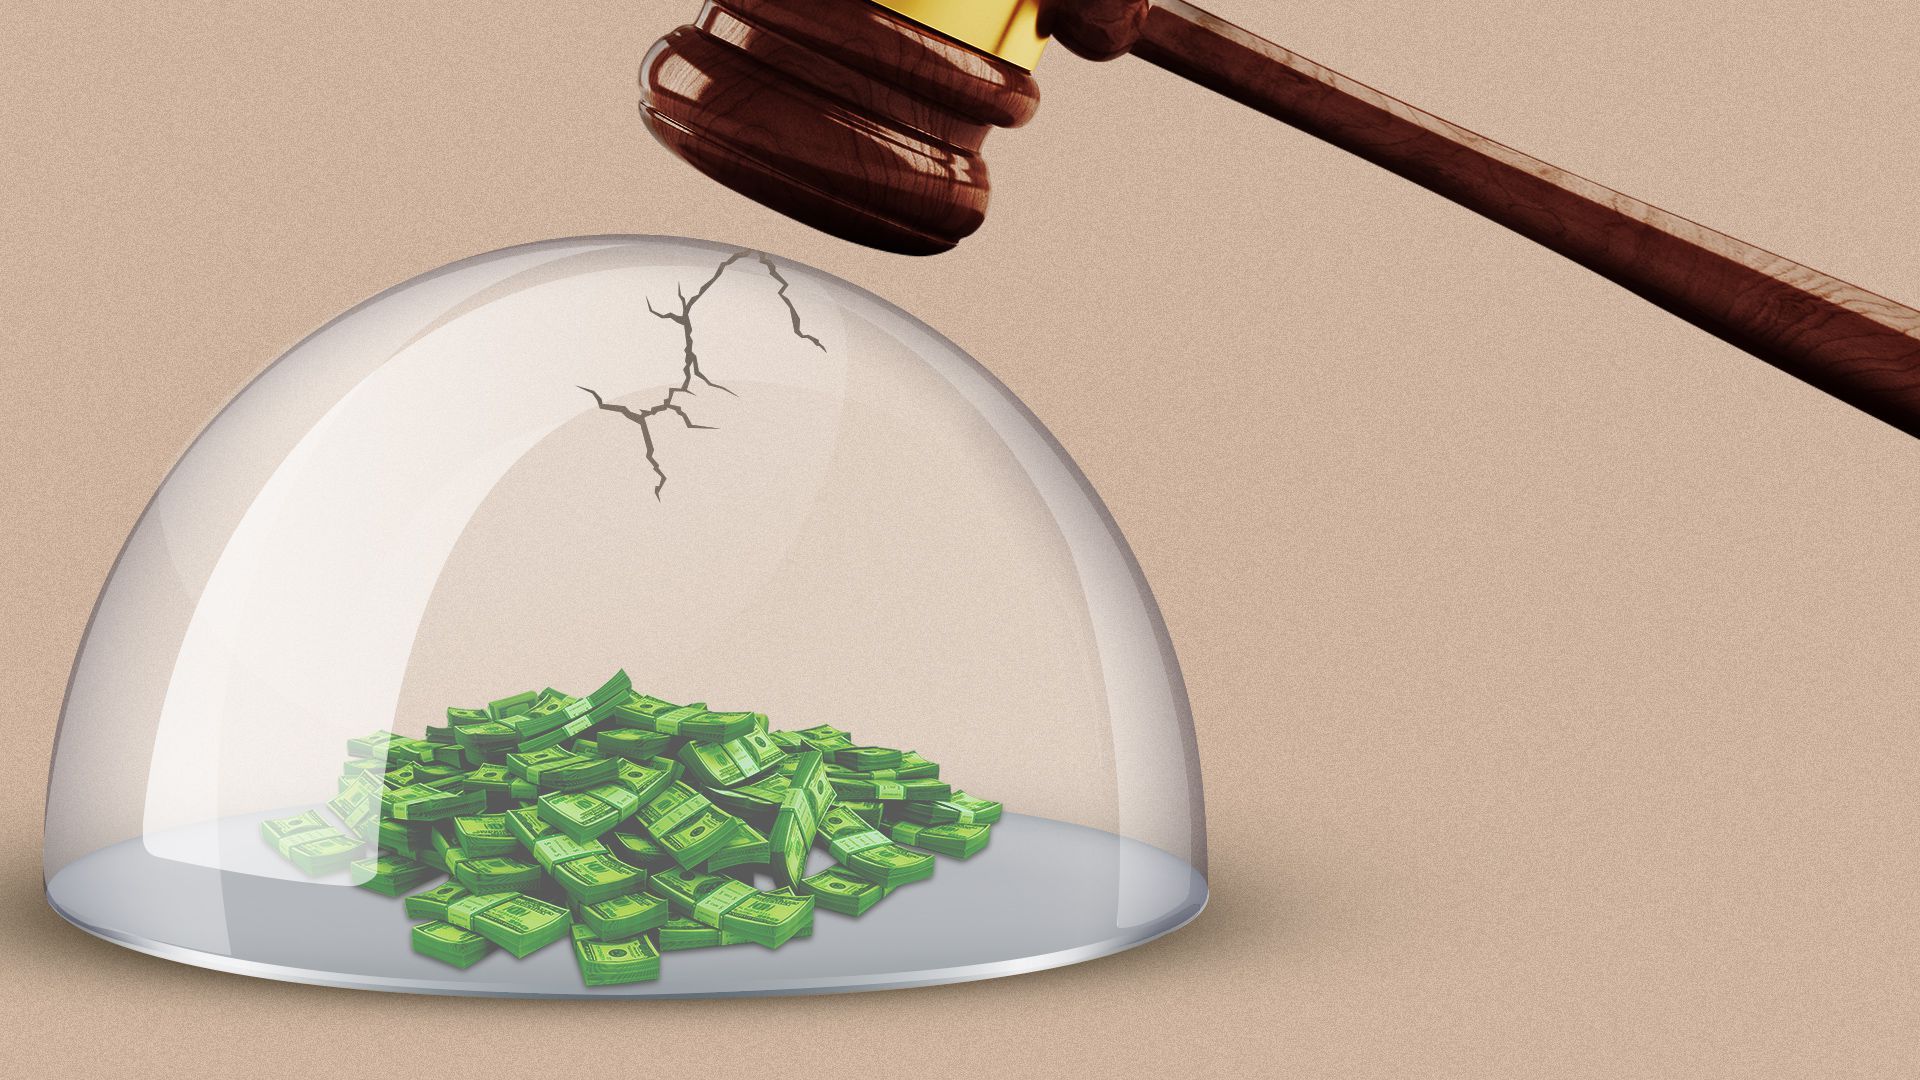 Illustration of a pile of money under a cracked glass dome with a gavel hovering overhead. 